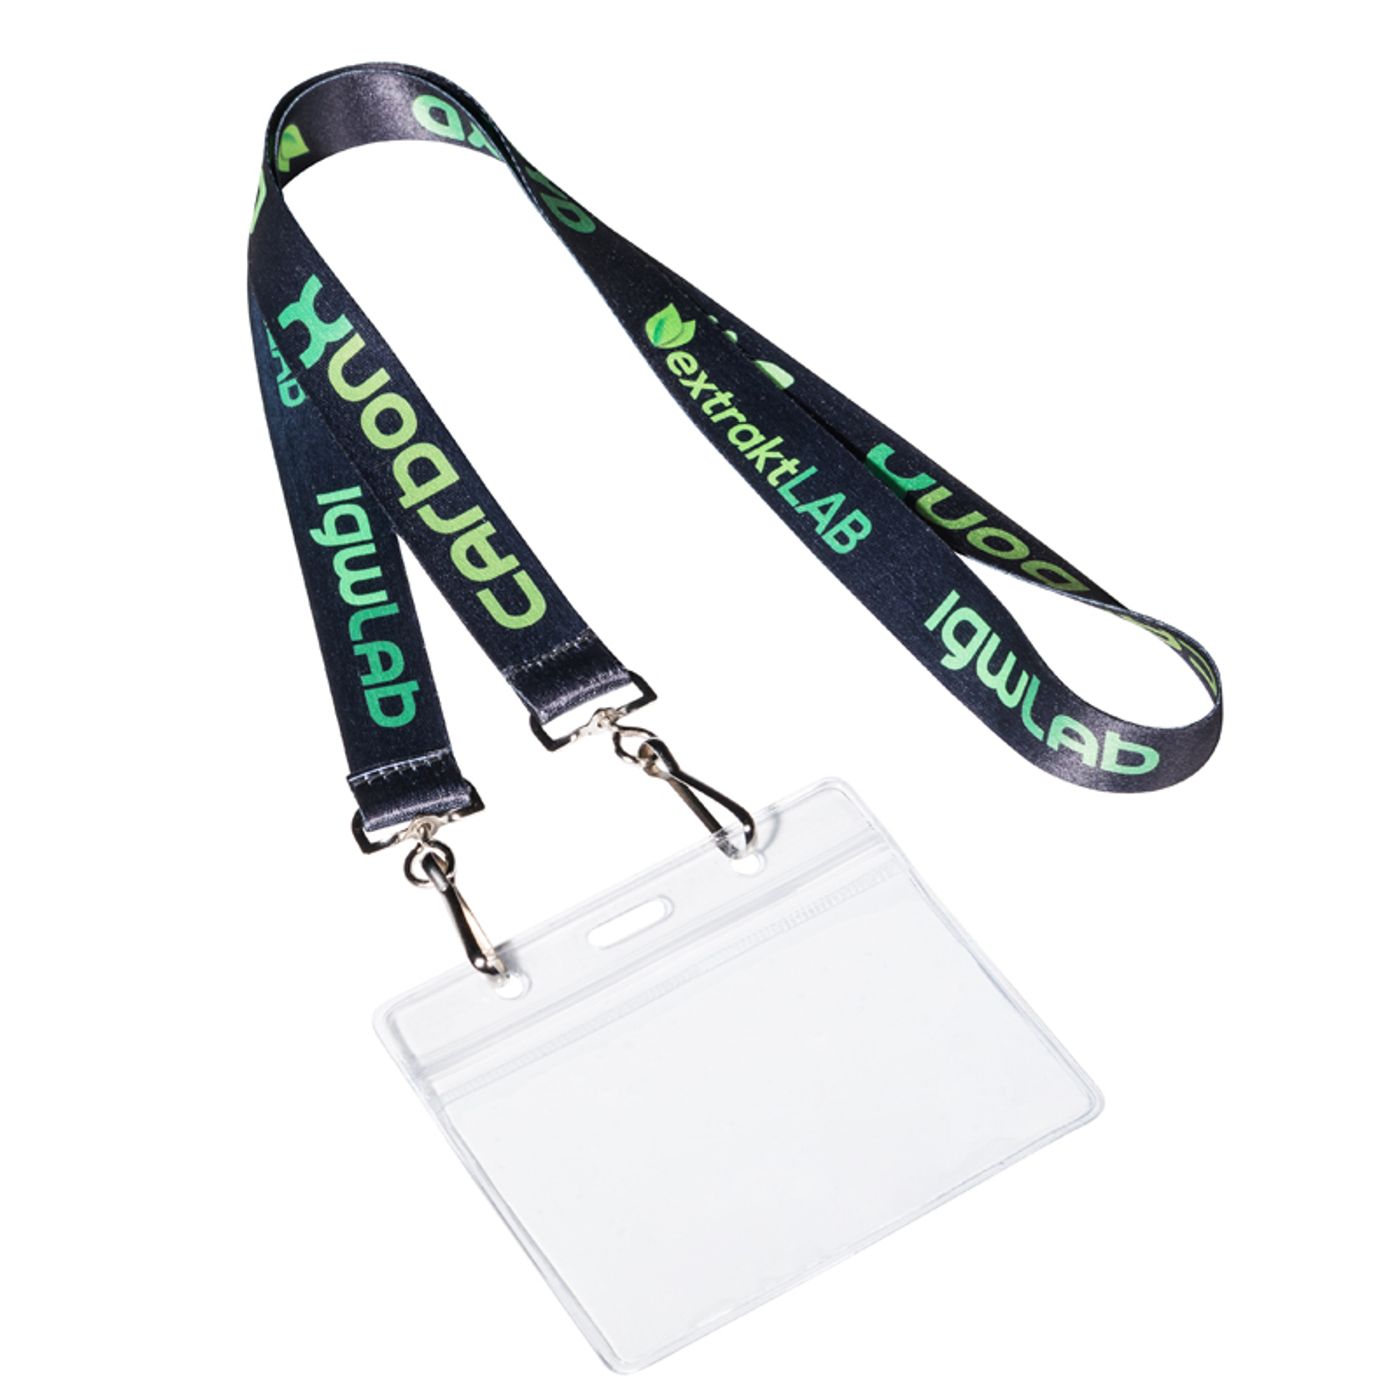 Open Ended Lanyards | Manufacturers & Suppliers | CustomButtonsNow.com ...